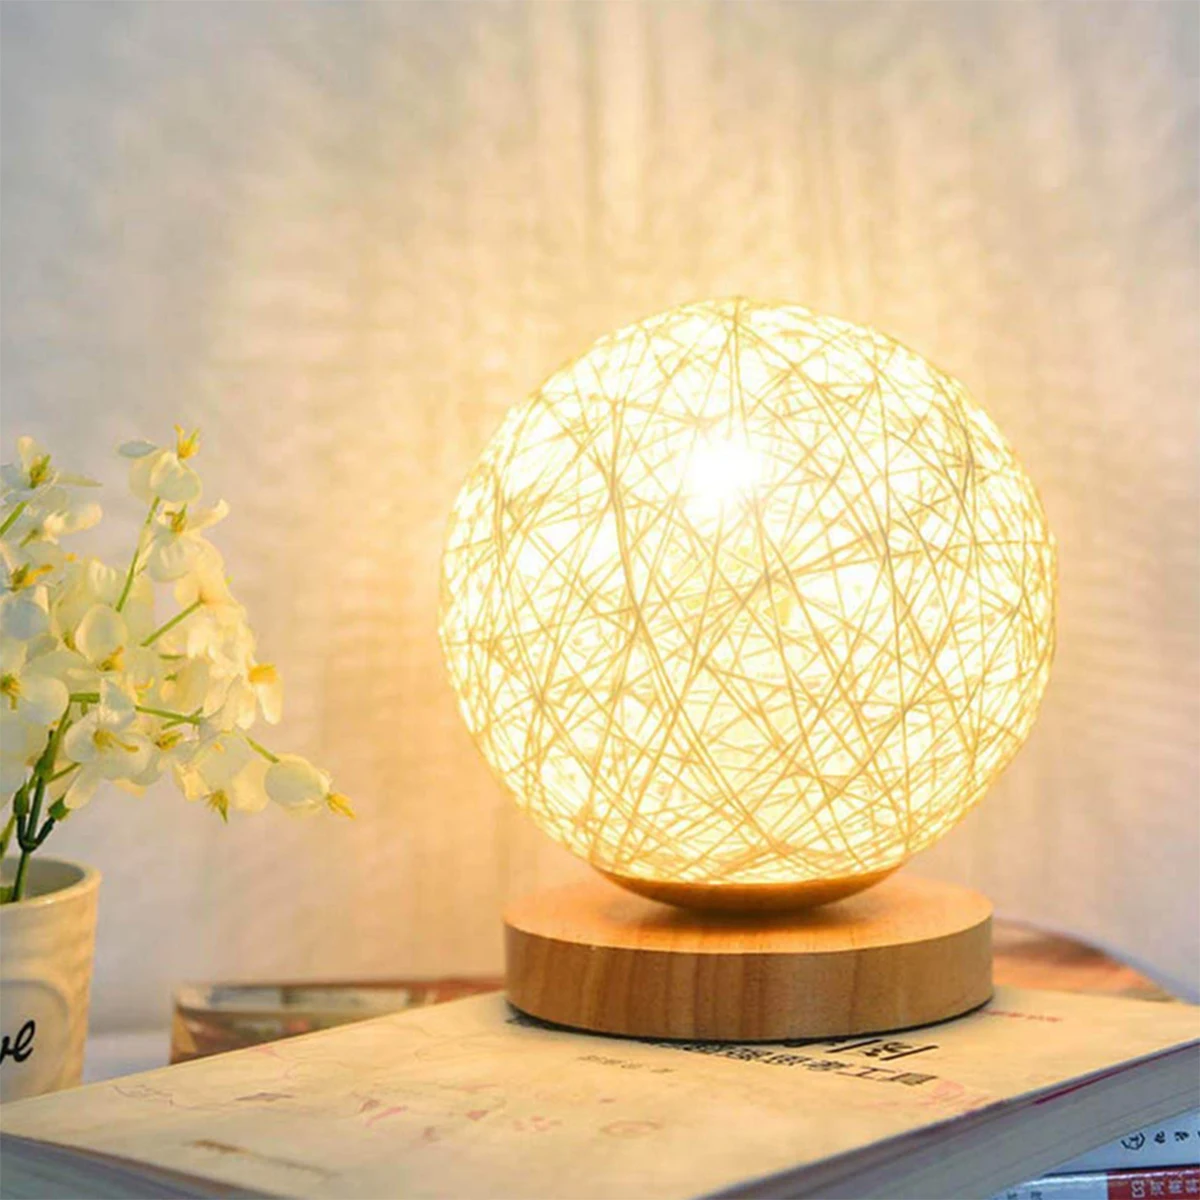 N ball night light usb table lamp dimmable hand knit rattan ball lampshade bedside lamp thumb200